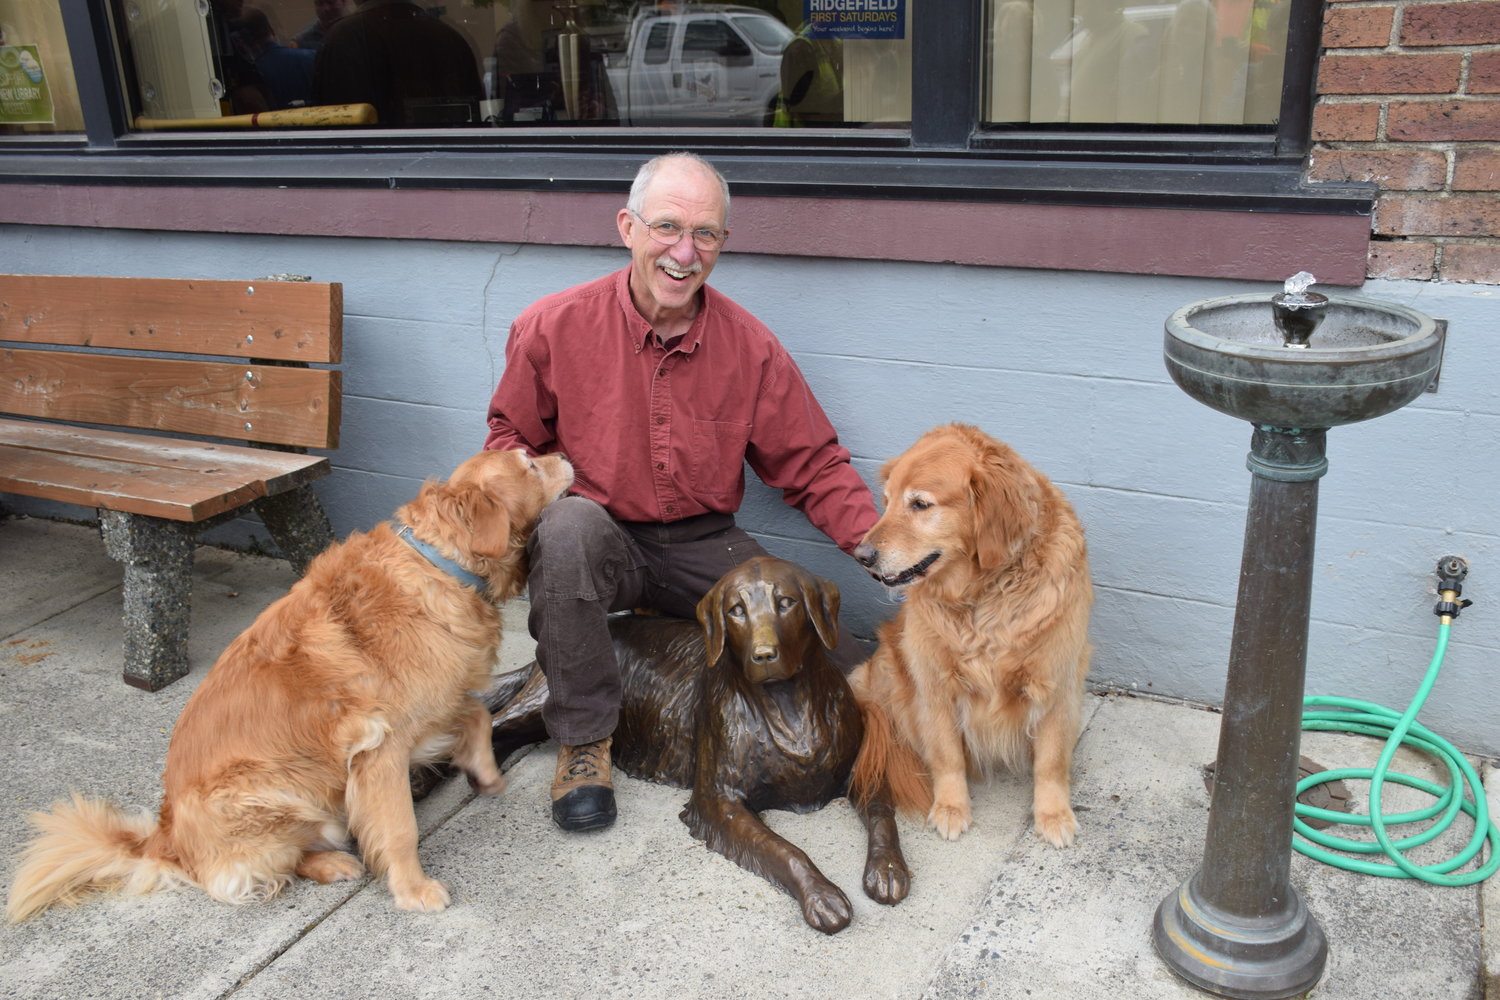 Former Ridgefield Mayor and community leader Tevis Laspa crowds around a bronze Golden Retriever statue in front of city hall along with his dogs Zoe, left, and Daisy, right, during an official unveiling of the statue, donated to the city by Laspa, May 4.